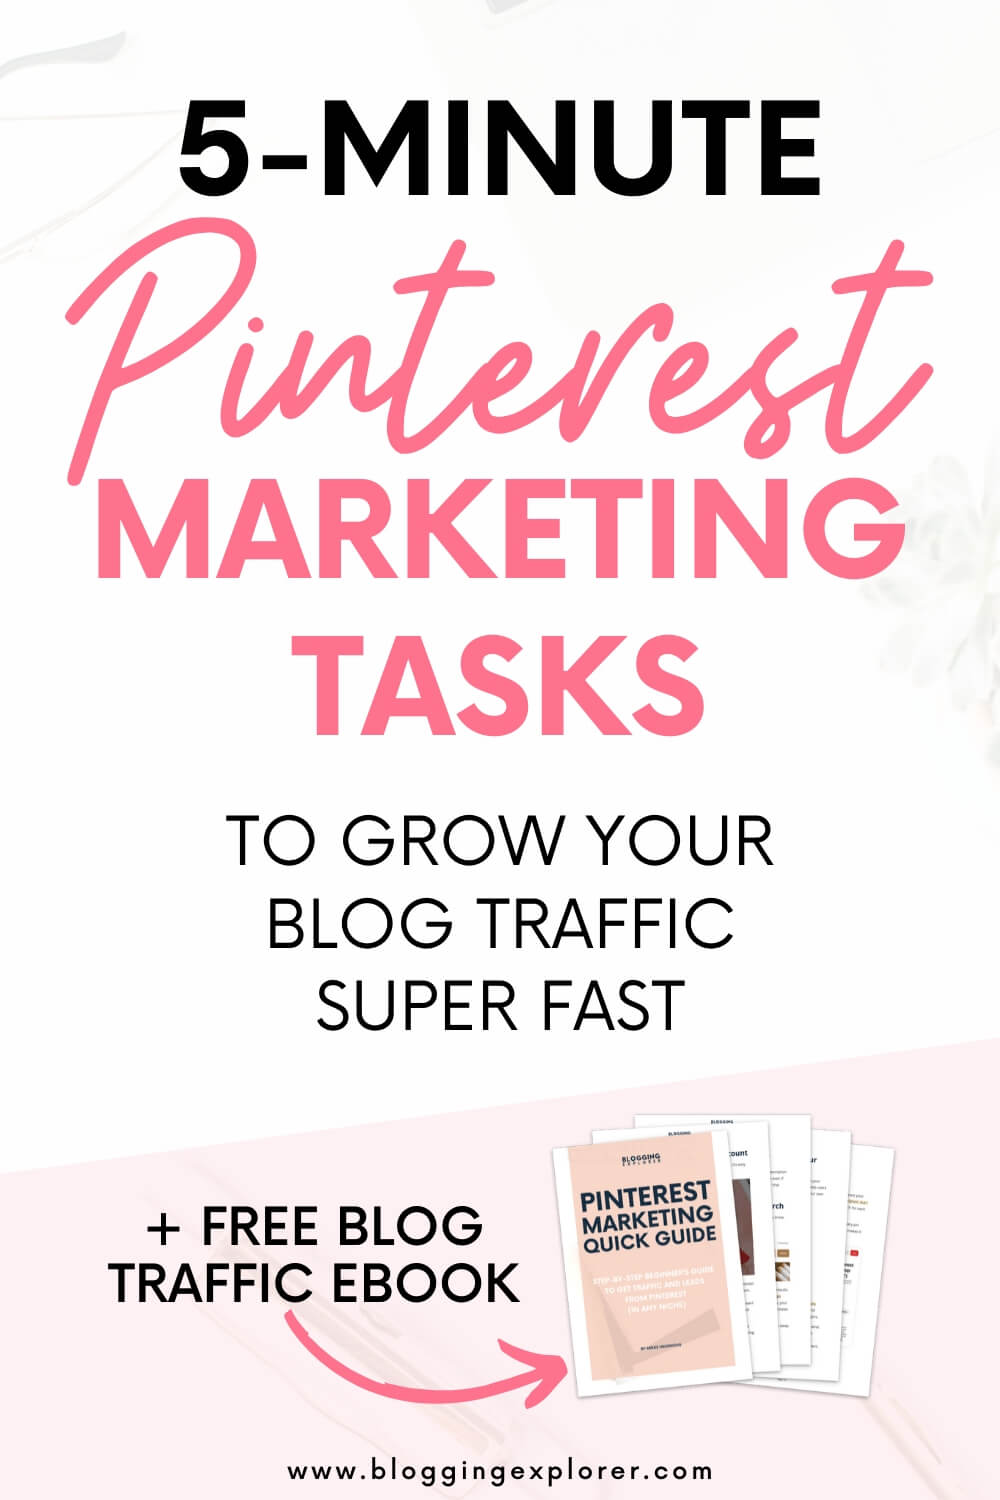 15+ Quick Pinterest Marketing Tasks You Can Do In 5 Minutes